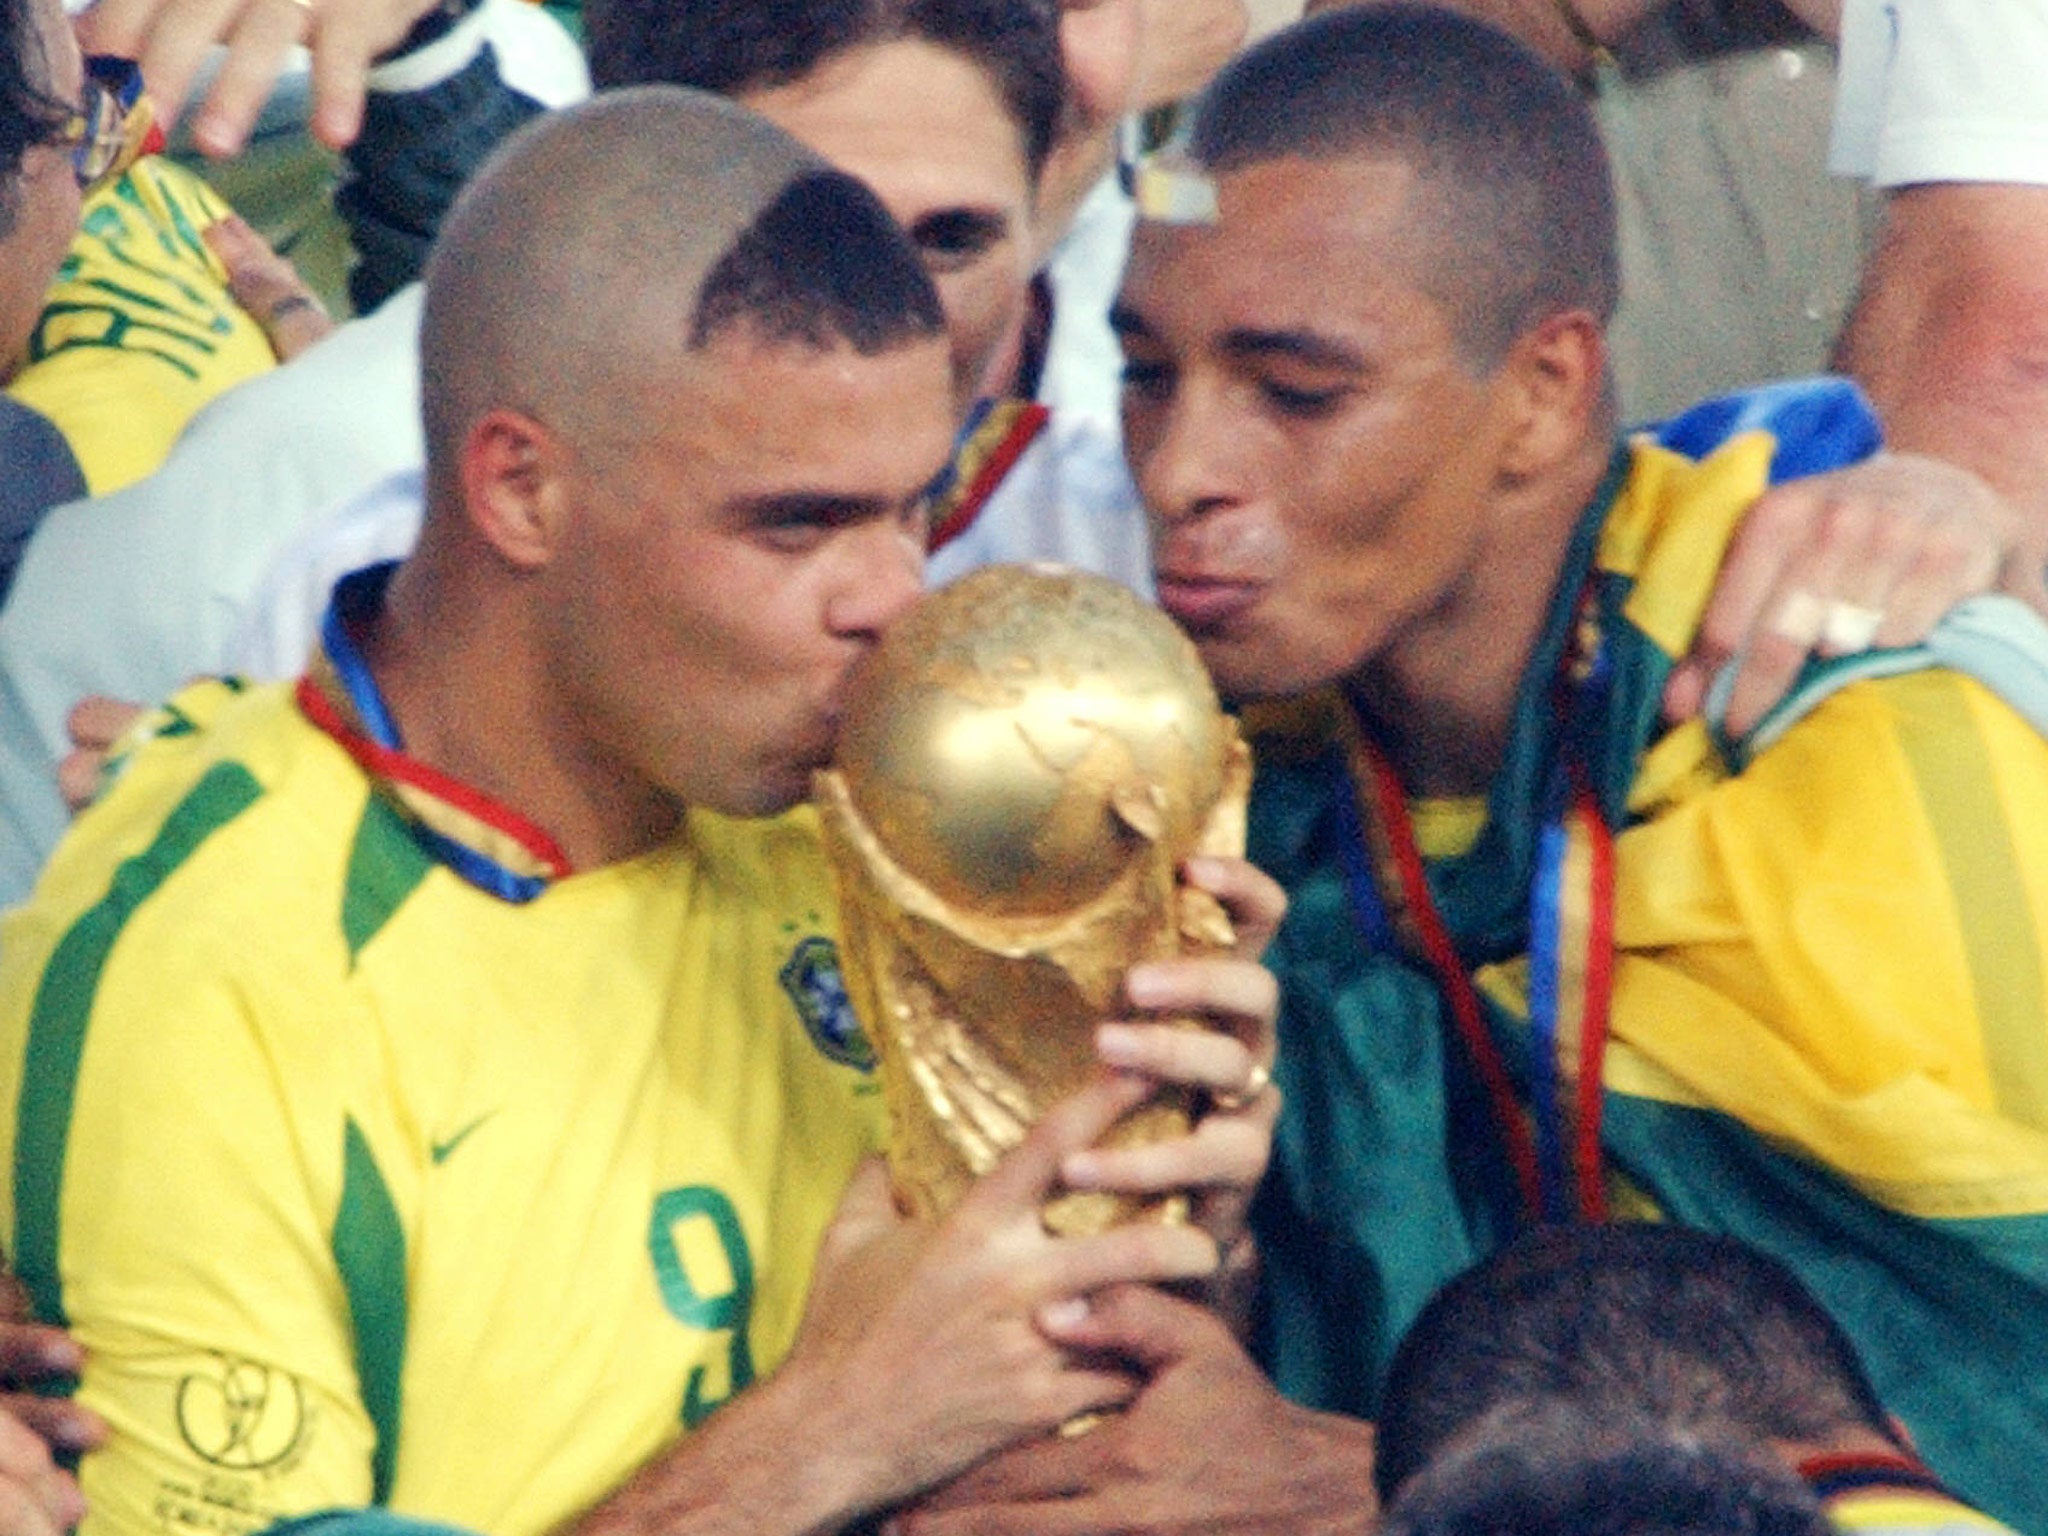 Gilberto Silva pictured alongside Ronaldo after winning the 2002 World Cup